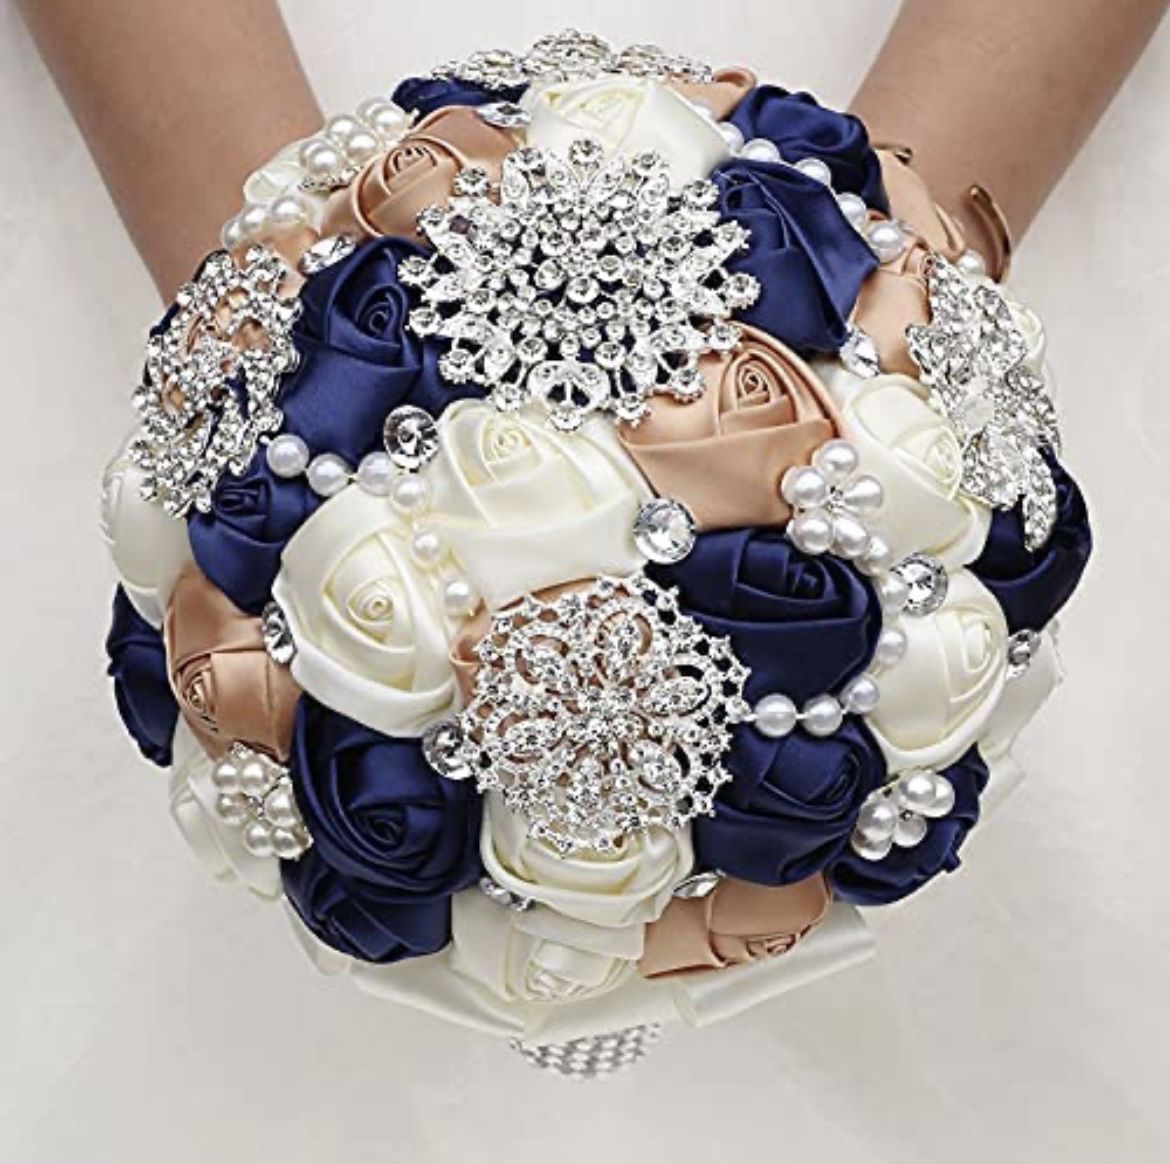 Gorgeous Wedding Bouquet With Pearls And Rhinestones 